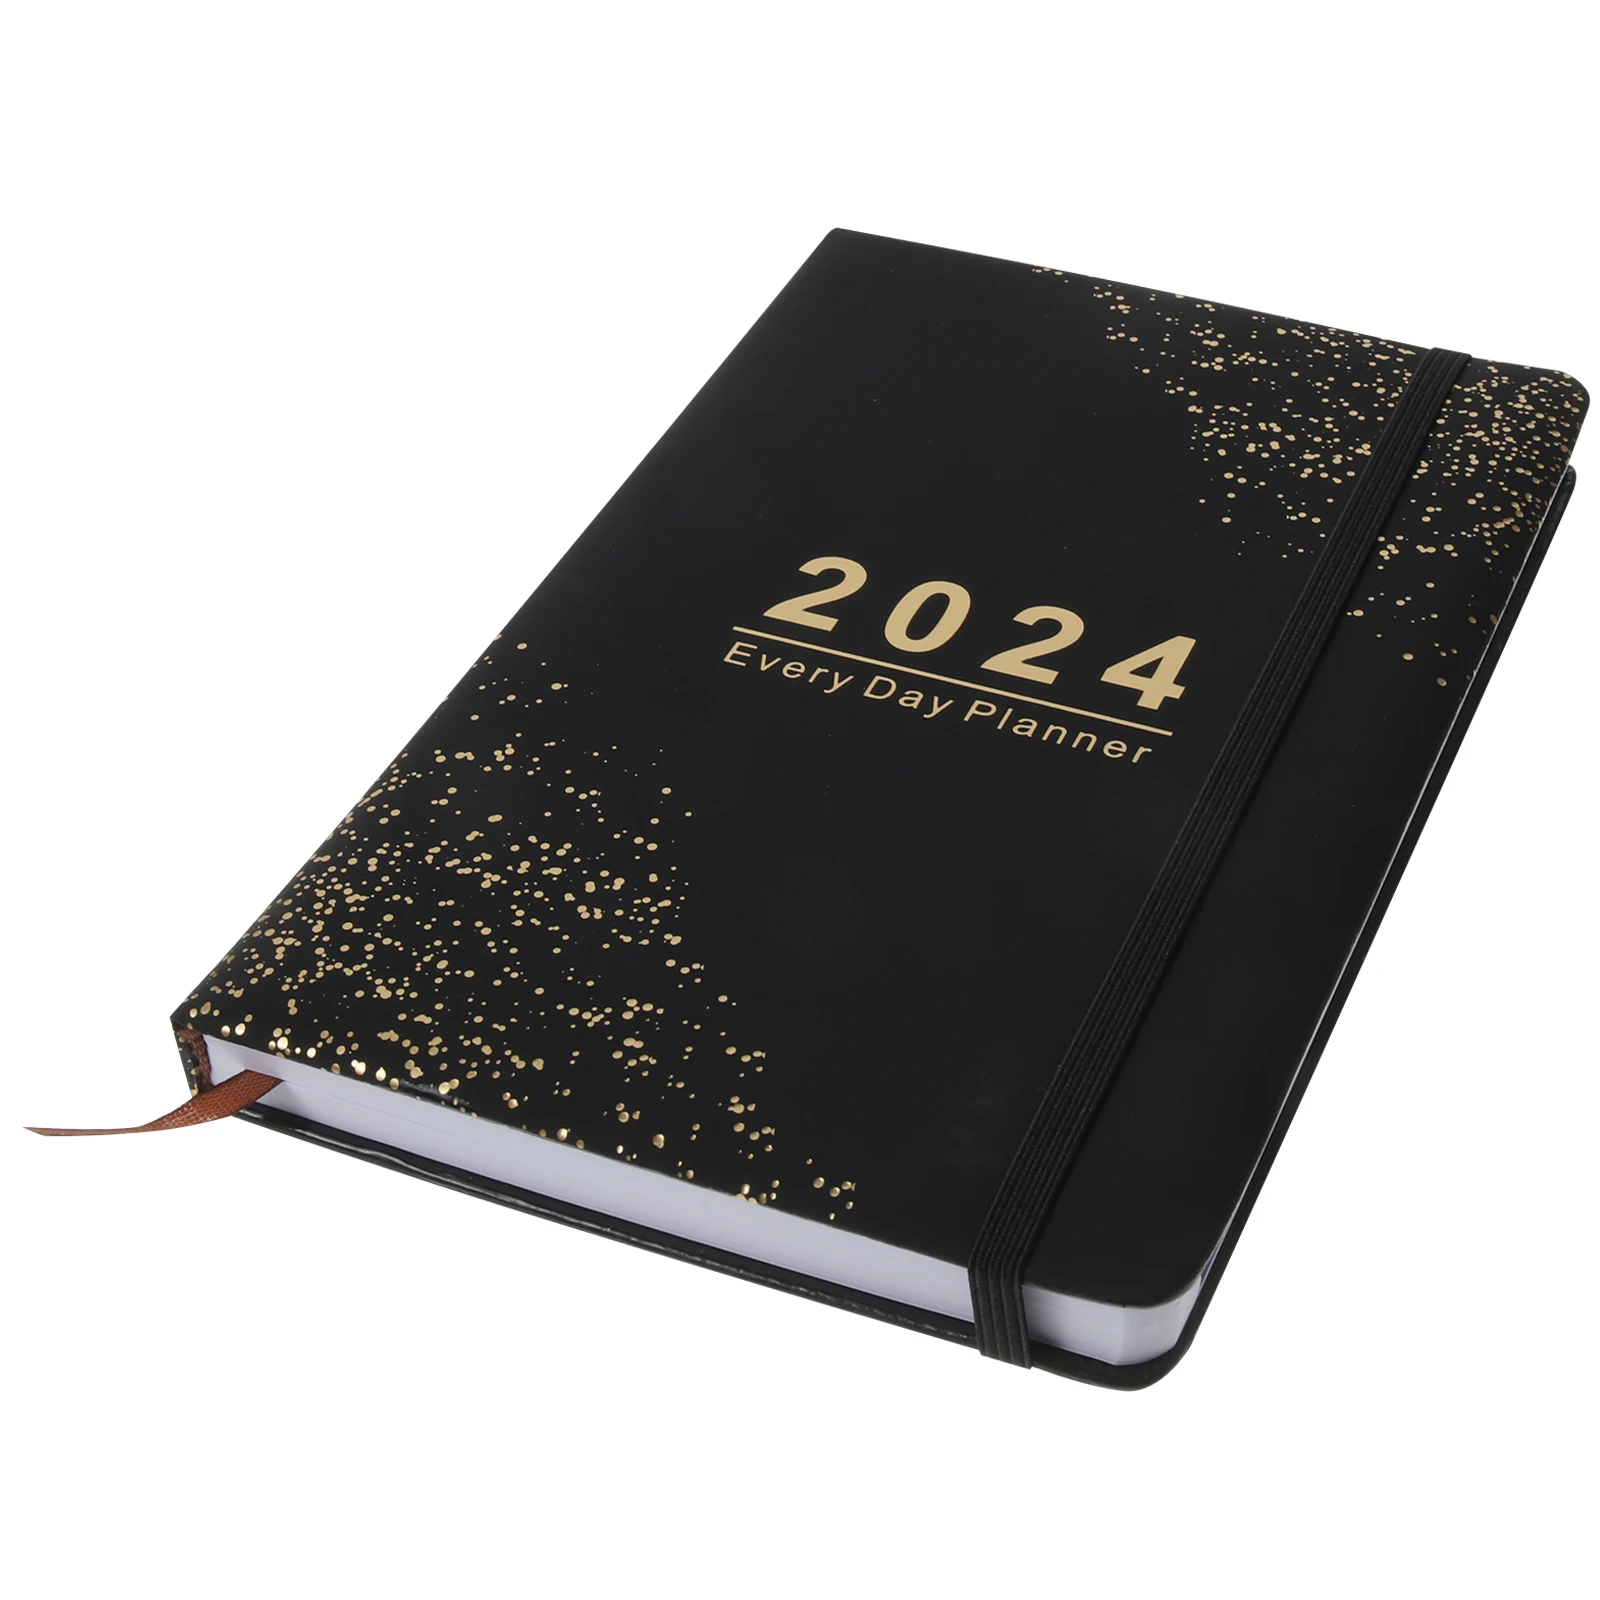 2024 Schedule Daily Schedule English Notebook Schedule Leather Cover Daily Schedule Schedule This Log Table Monthly Planner 2022 planner organizer a5 notebook agenda daily weekly schedule monthly plan school office supplies journals notepad stationery